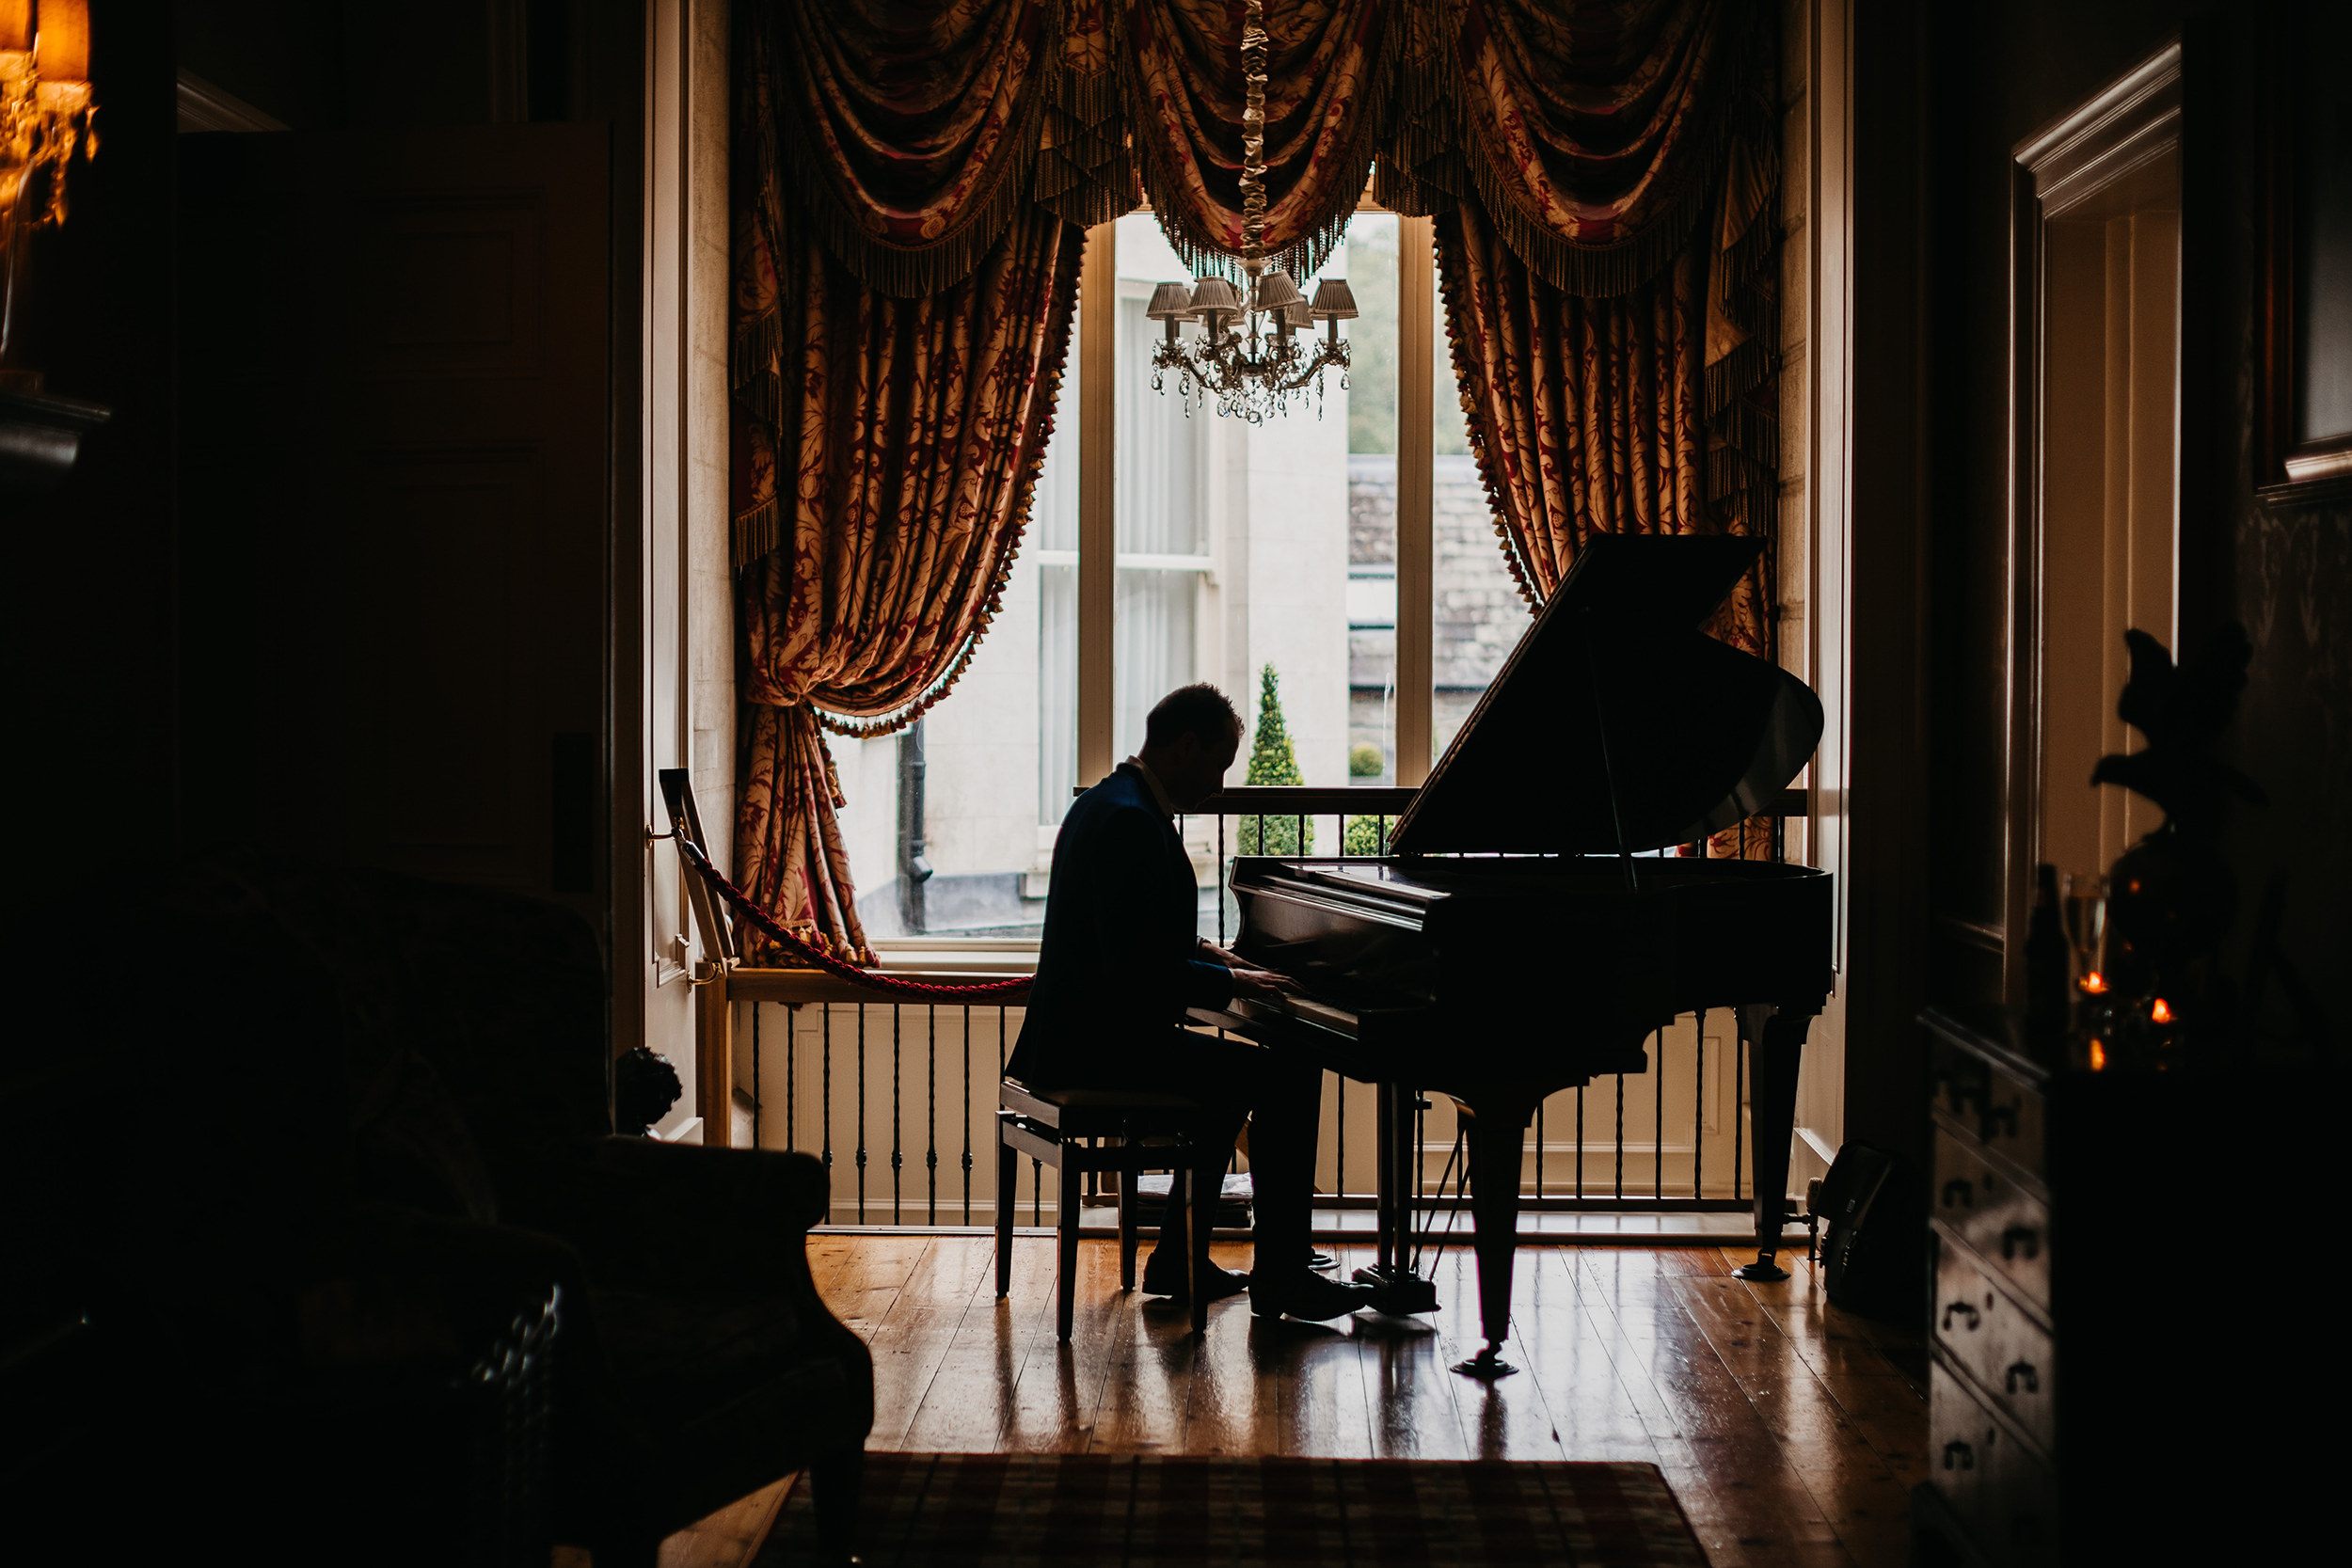 Silhouette of Joe Kenny playing baby grand piano in Tankardstown House, Co. Meath